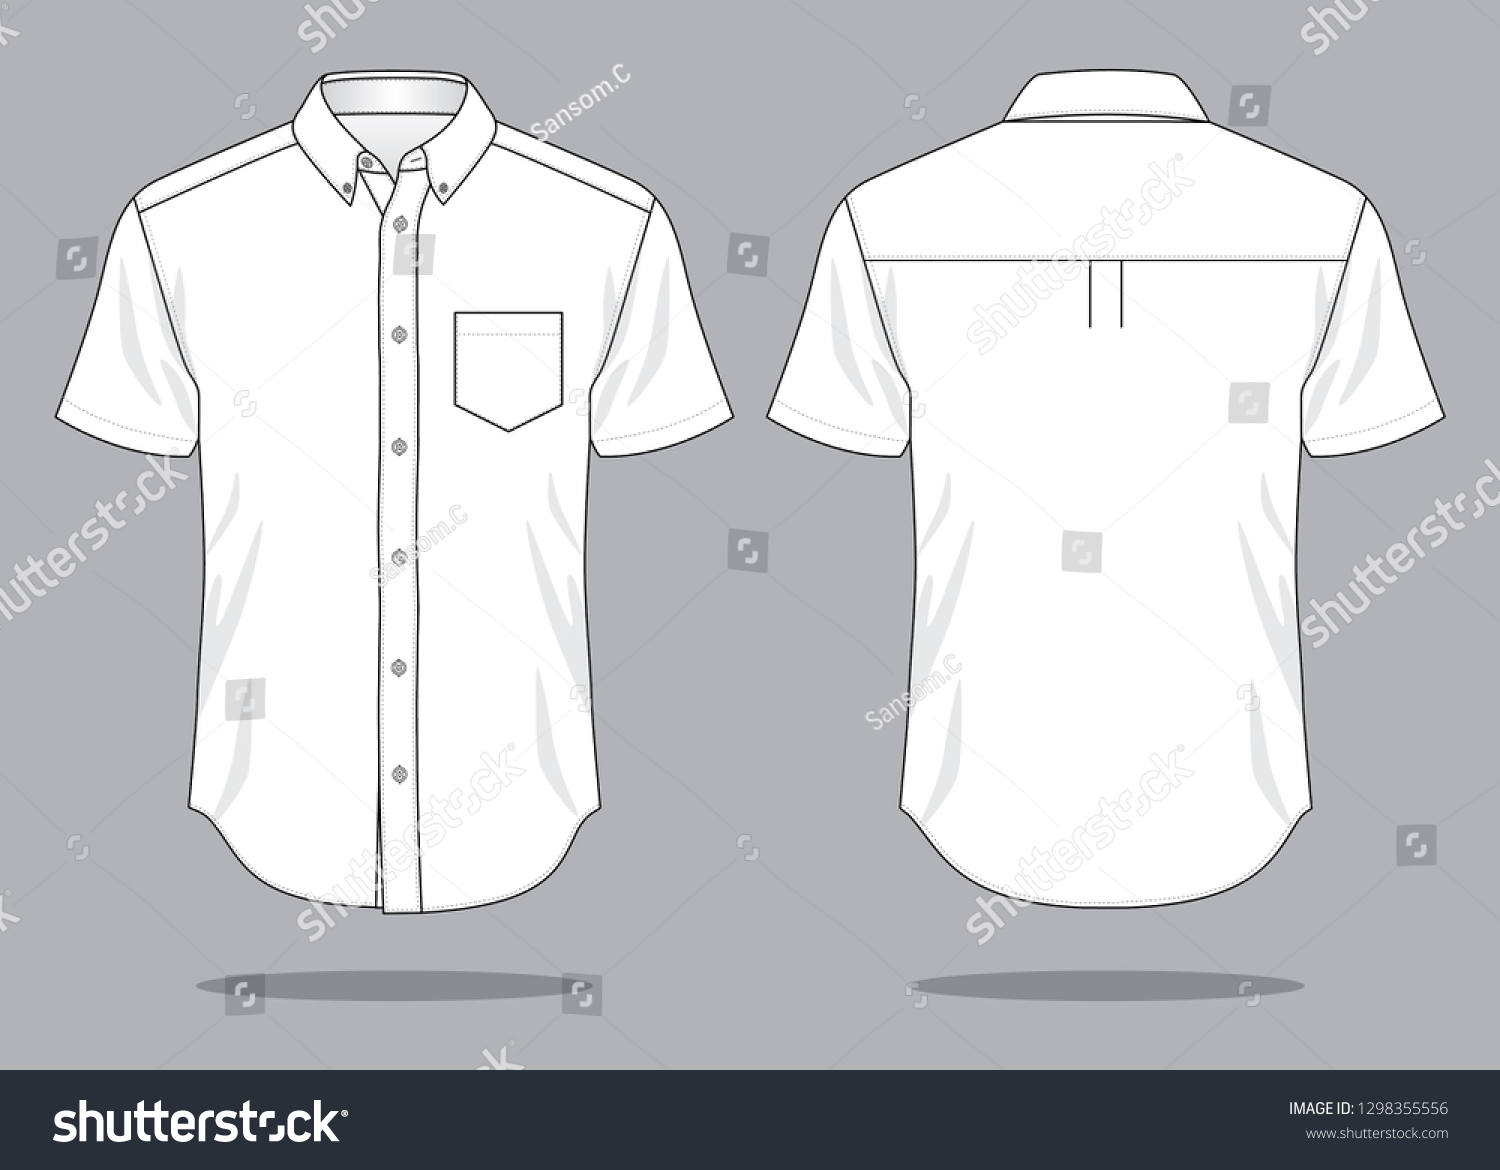 Blank White Short Sleeve Shirt With One Pocket Template On Gray Background. Front and Back View, Vector File. #1298355556